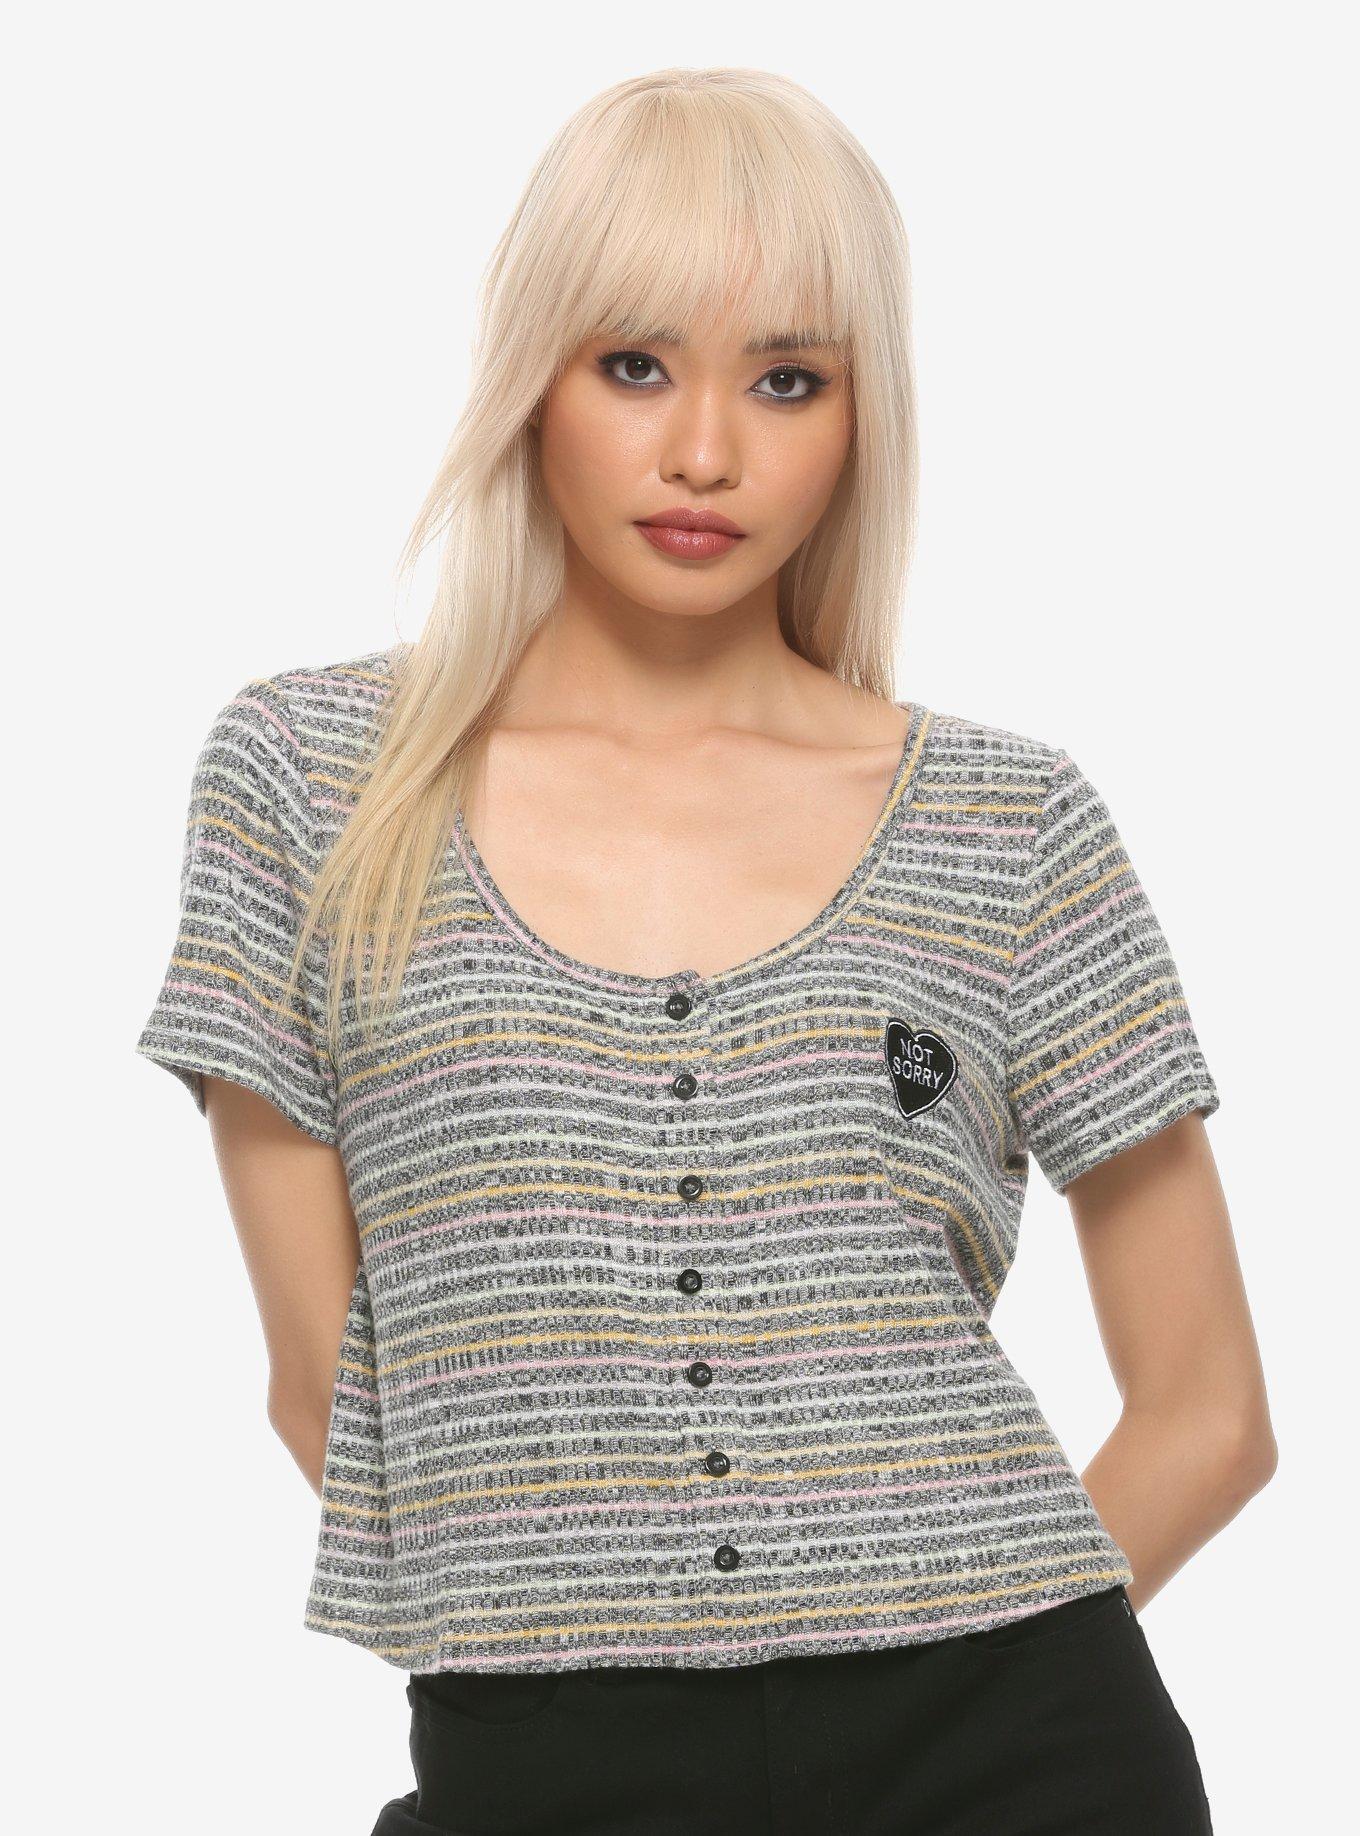 Not Sorry Heart Patch Girls Ribbed Top, BLACK, hi-res